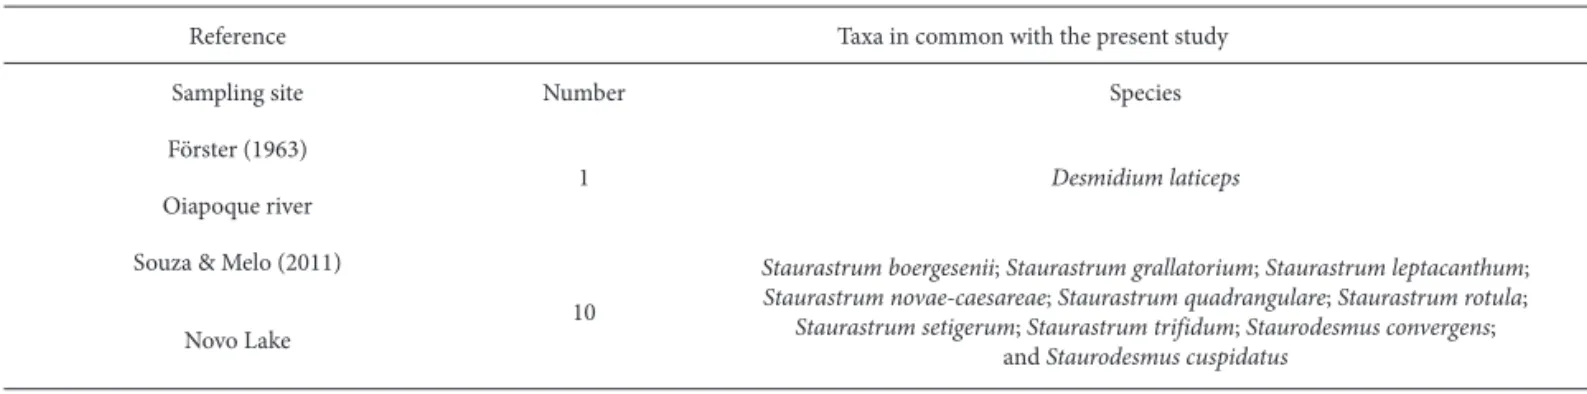 Table 3. Previous studies of continental microalgae in the state of Amapá: taxa in common with the present study